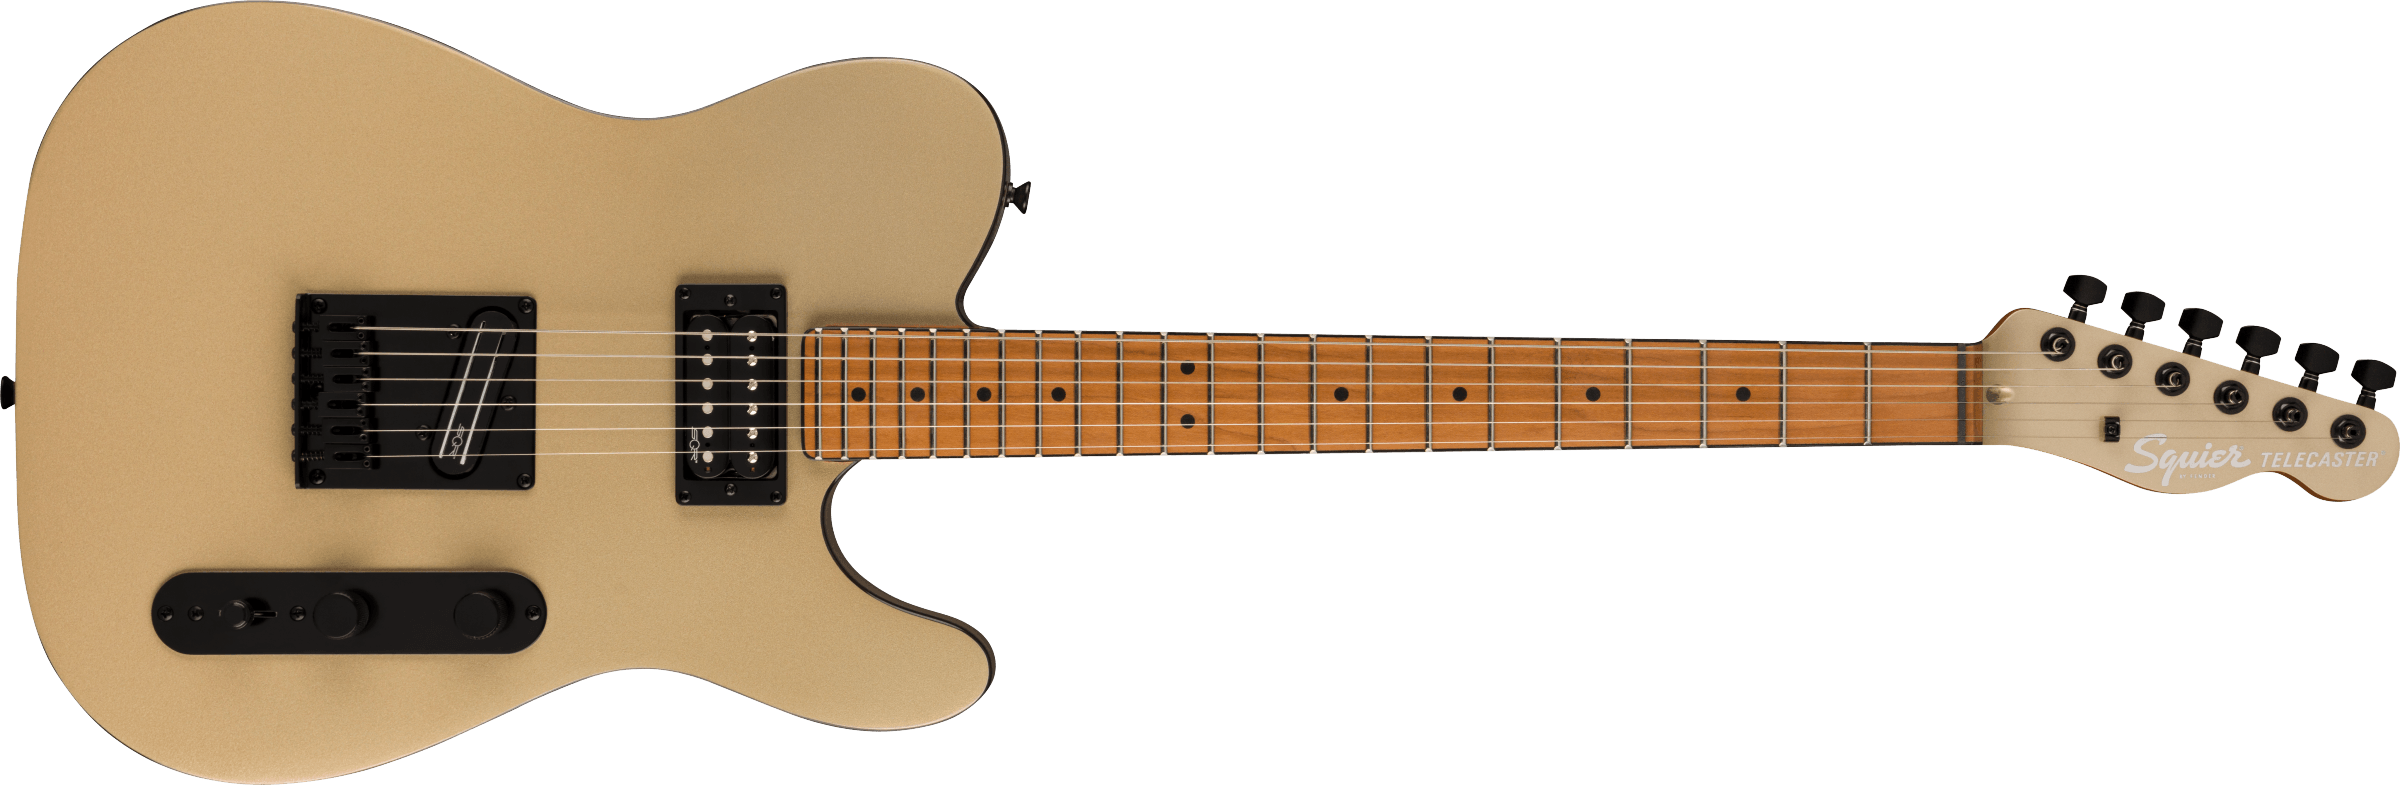 Squier Contemporary Telecaster Roasted Maple Fingerboard Shoreline Gold F-0371225544